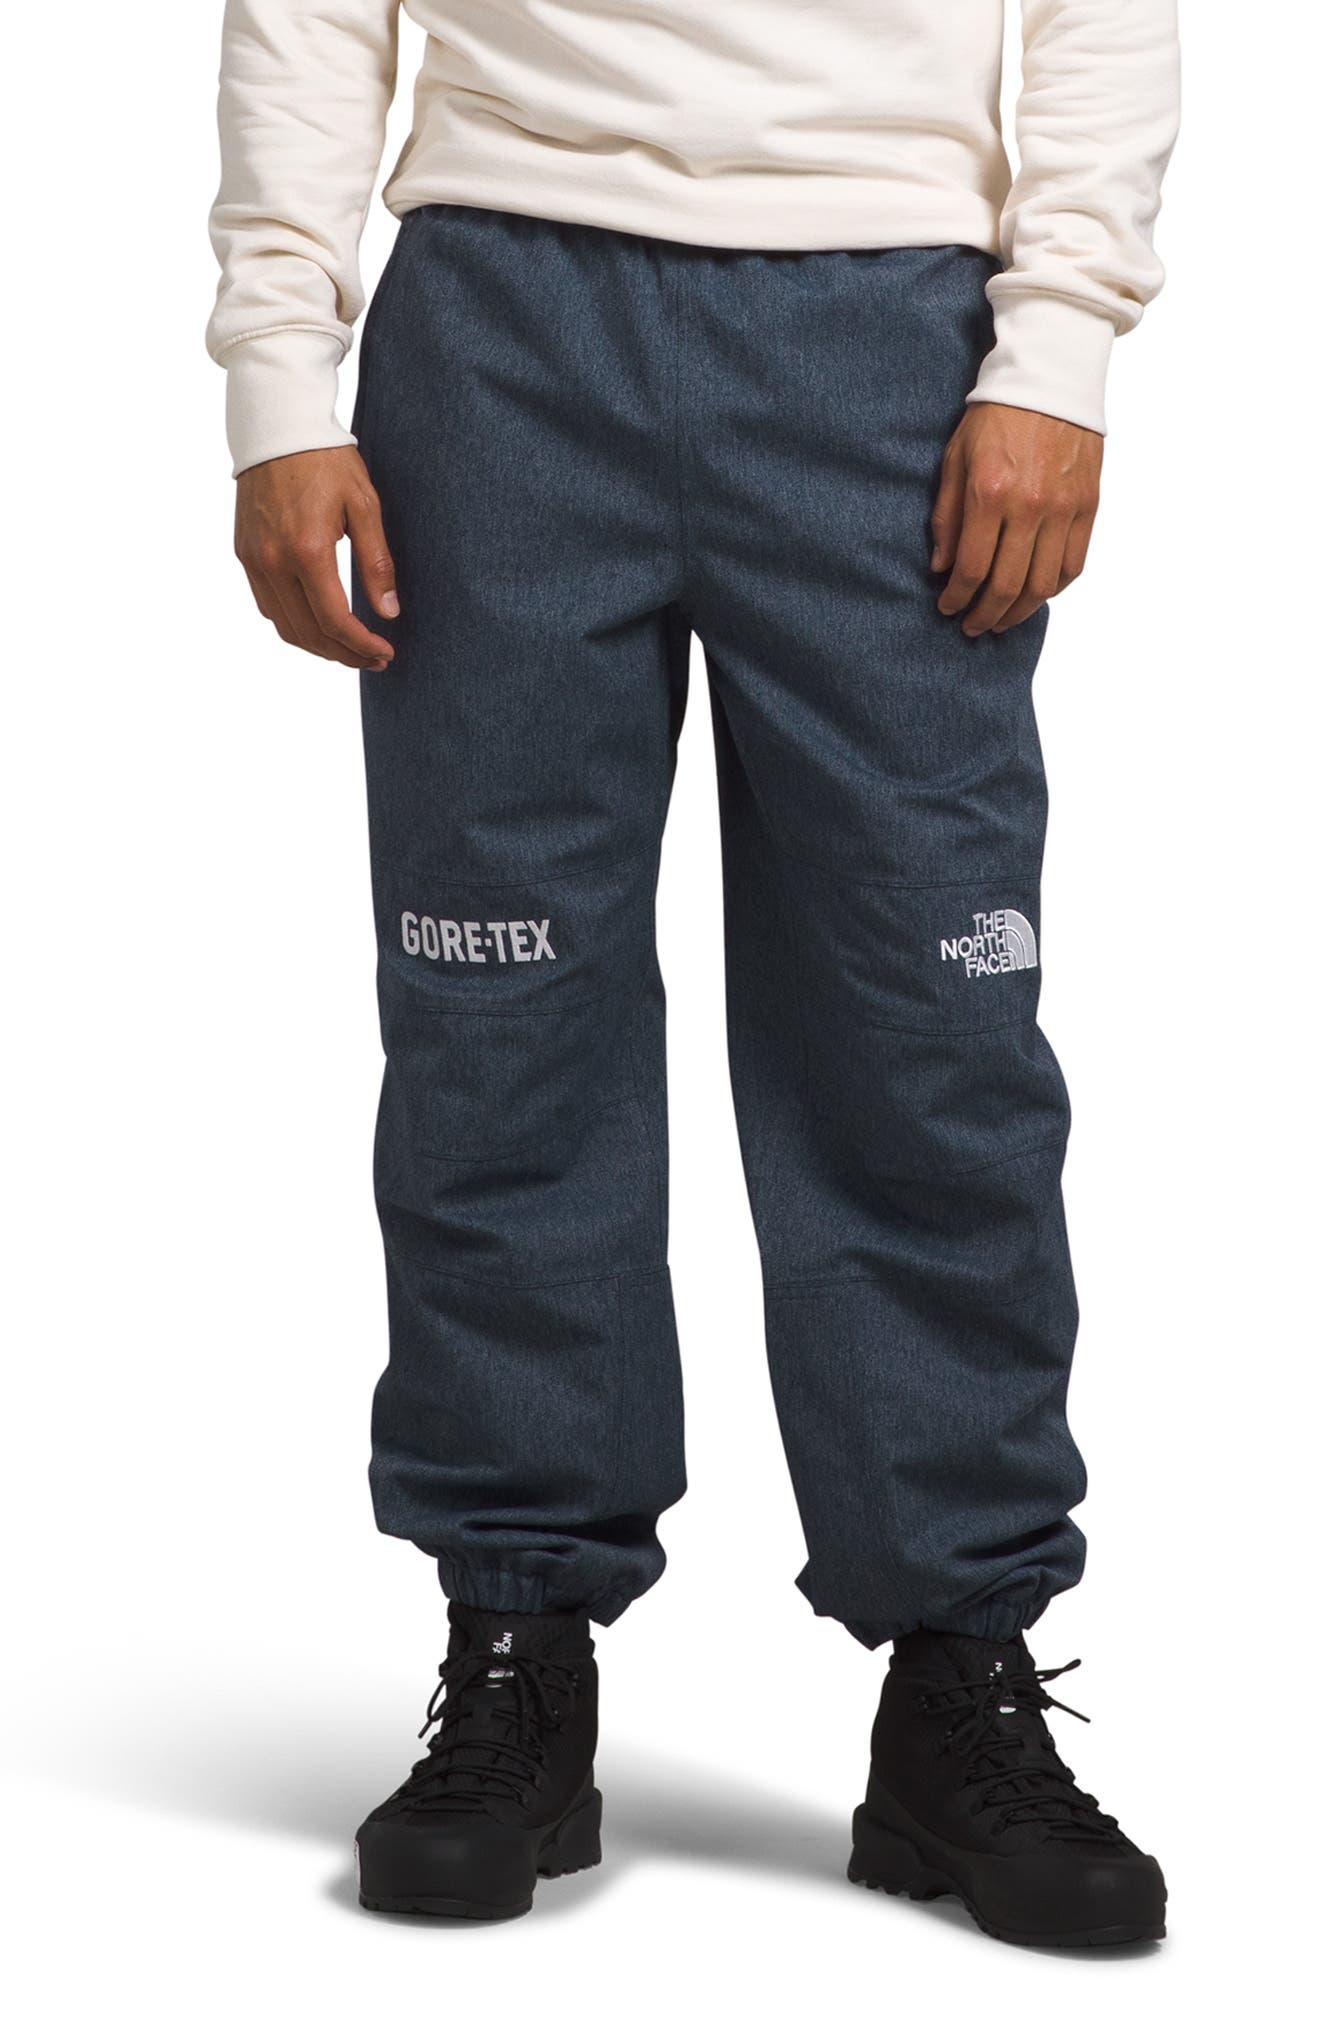 Mountain RMST straight pants in black - The North Face